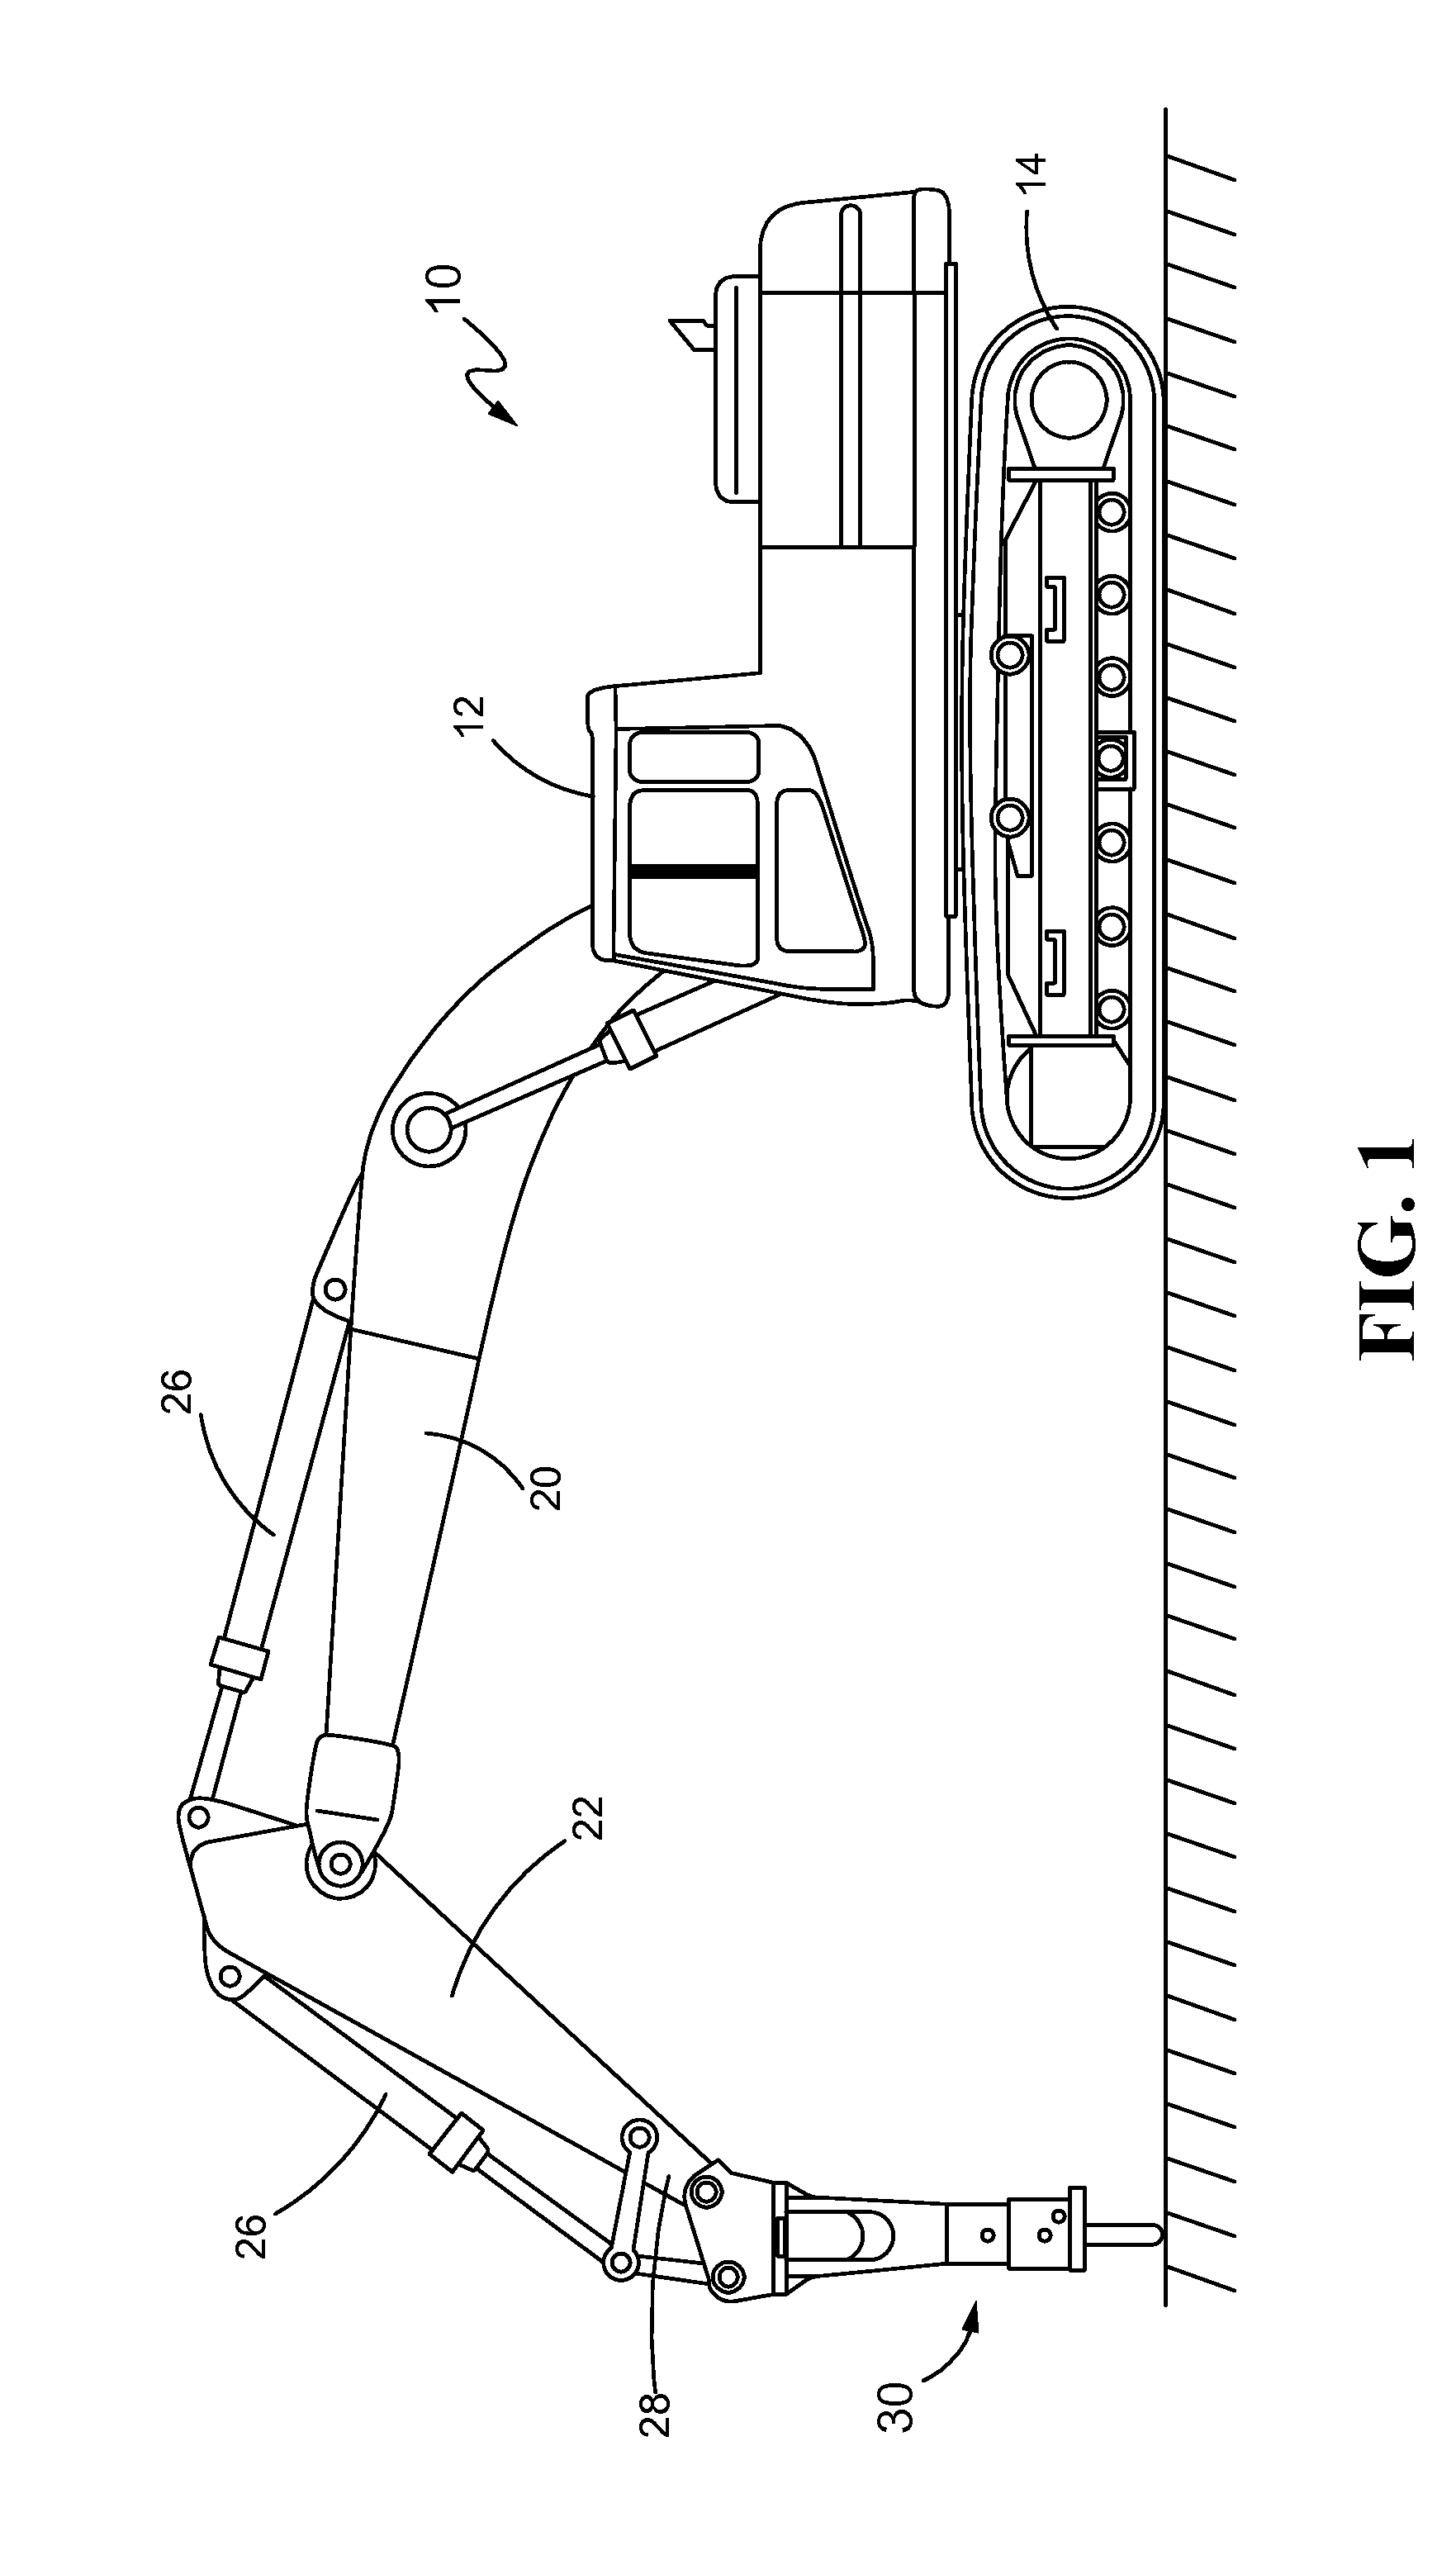 Tie rod support for hydraulic hammer